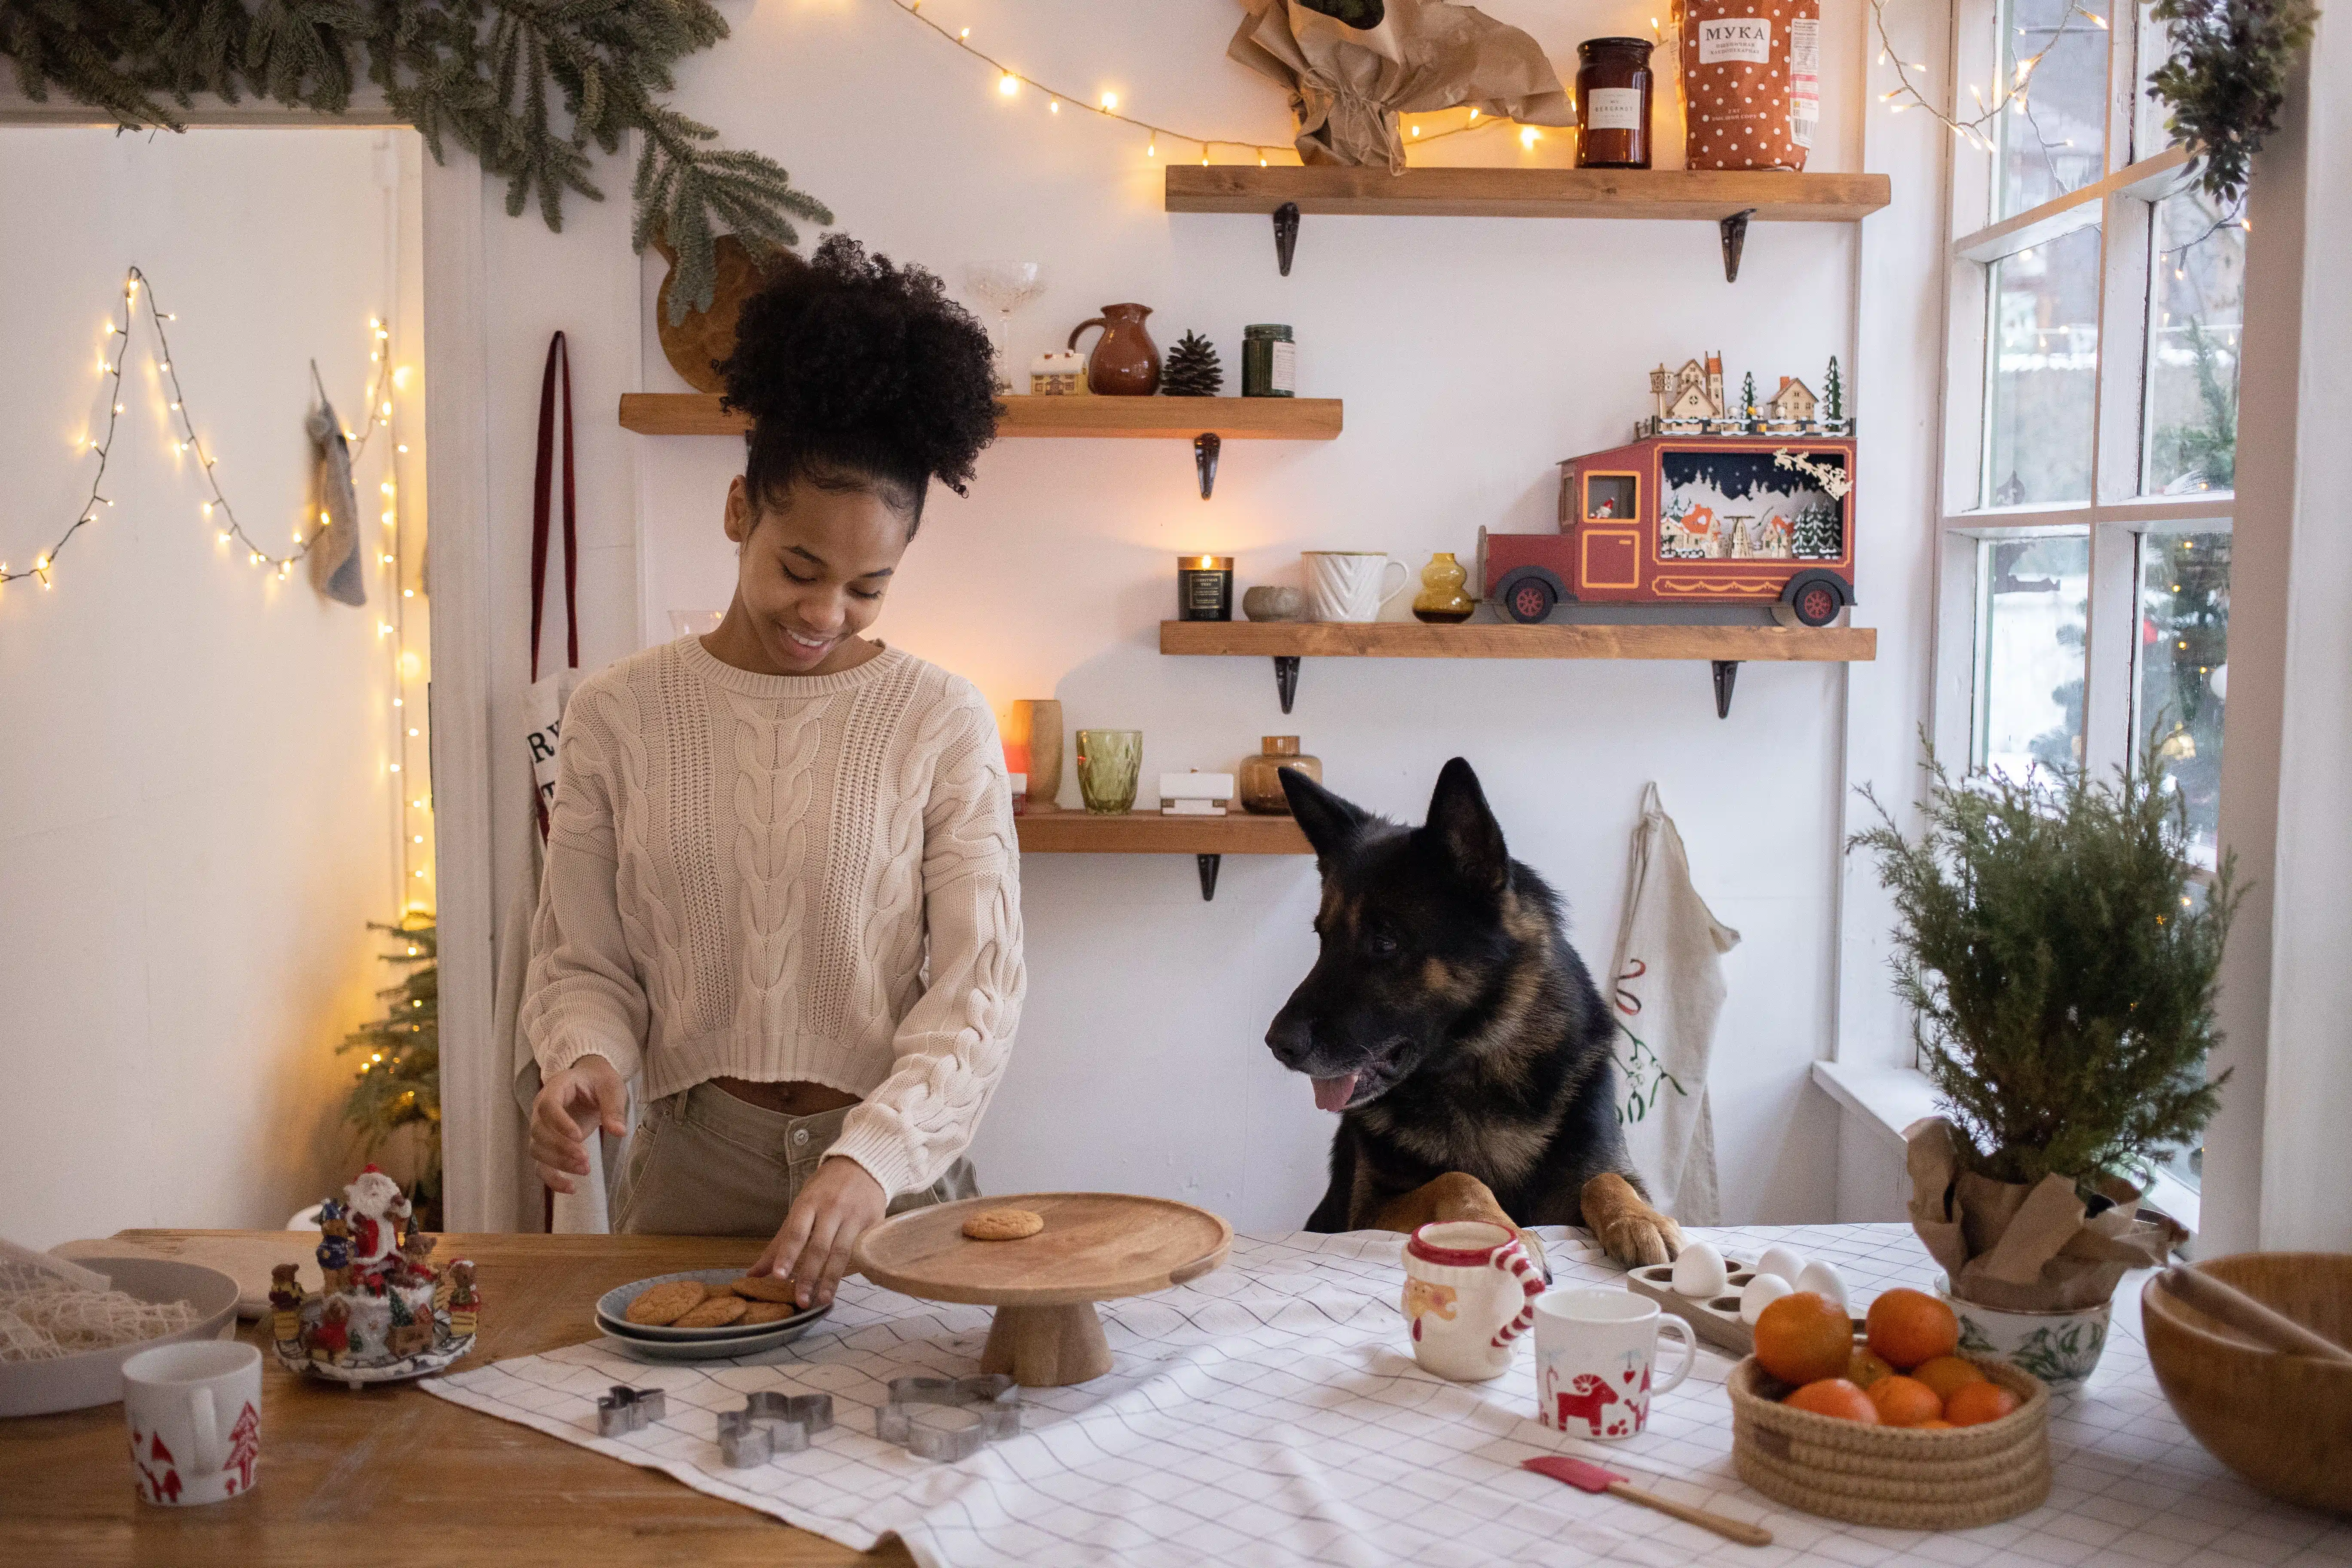 Can a dog eat vegetables? This pup creatainly wants cookies watches its owner prep a yummy meal.